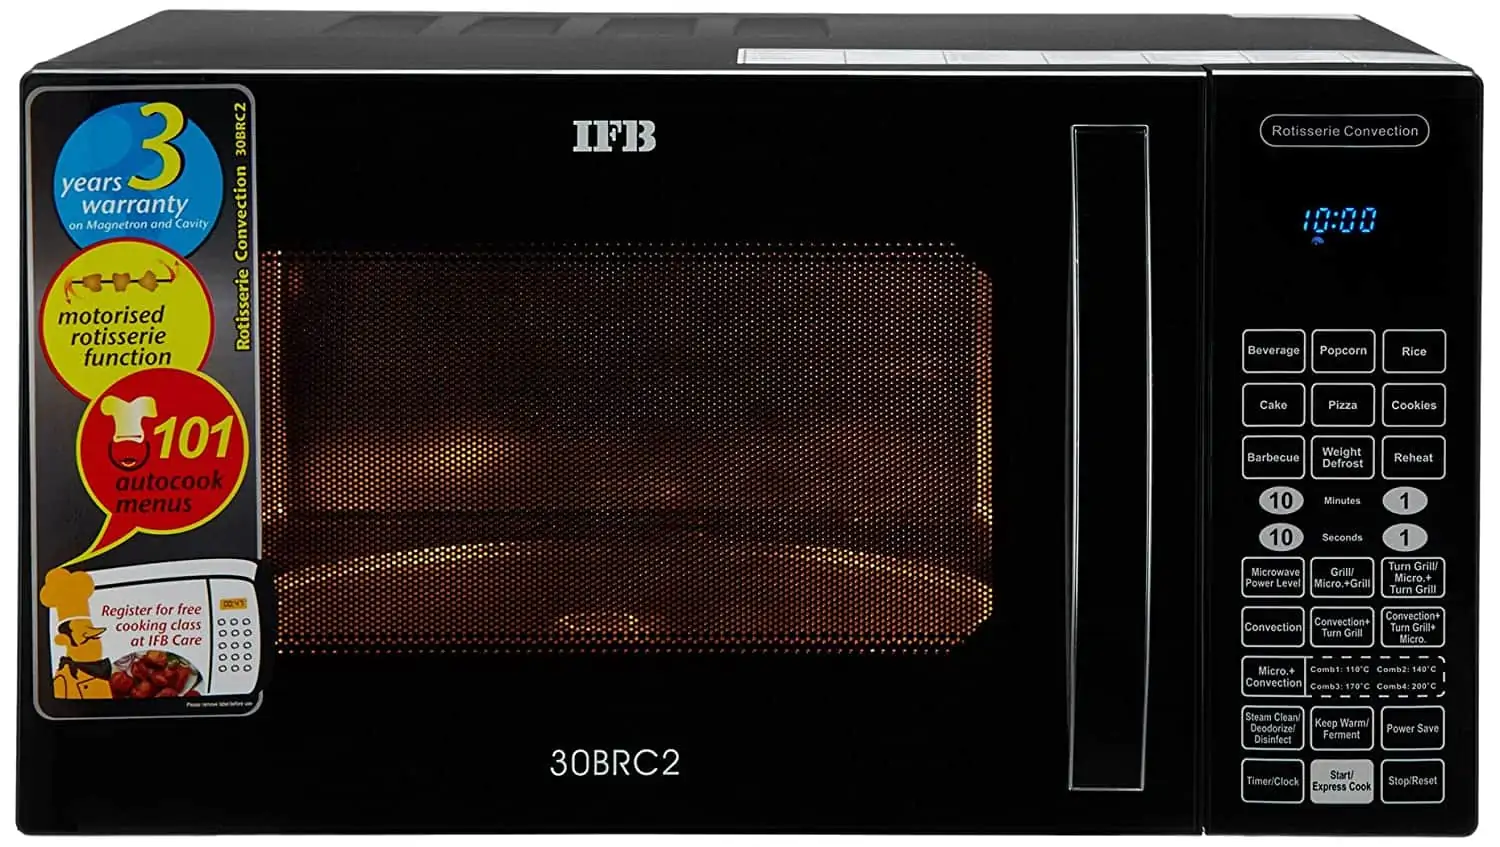 IFB 30 L Convection Microwave Oven